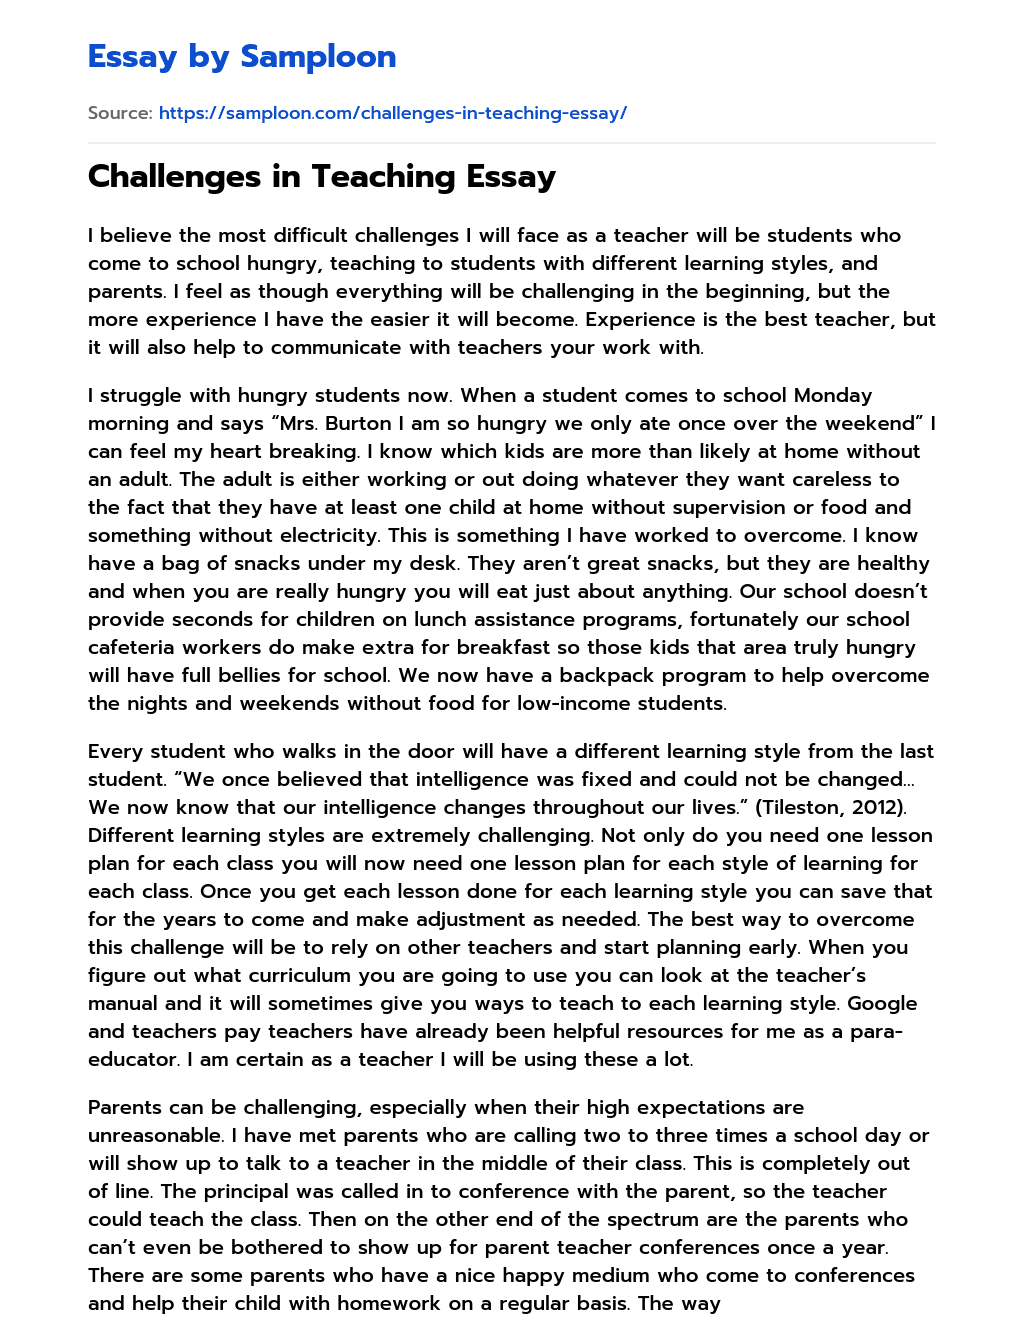 challenges in teaching essay